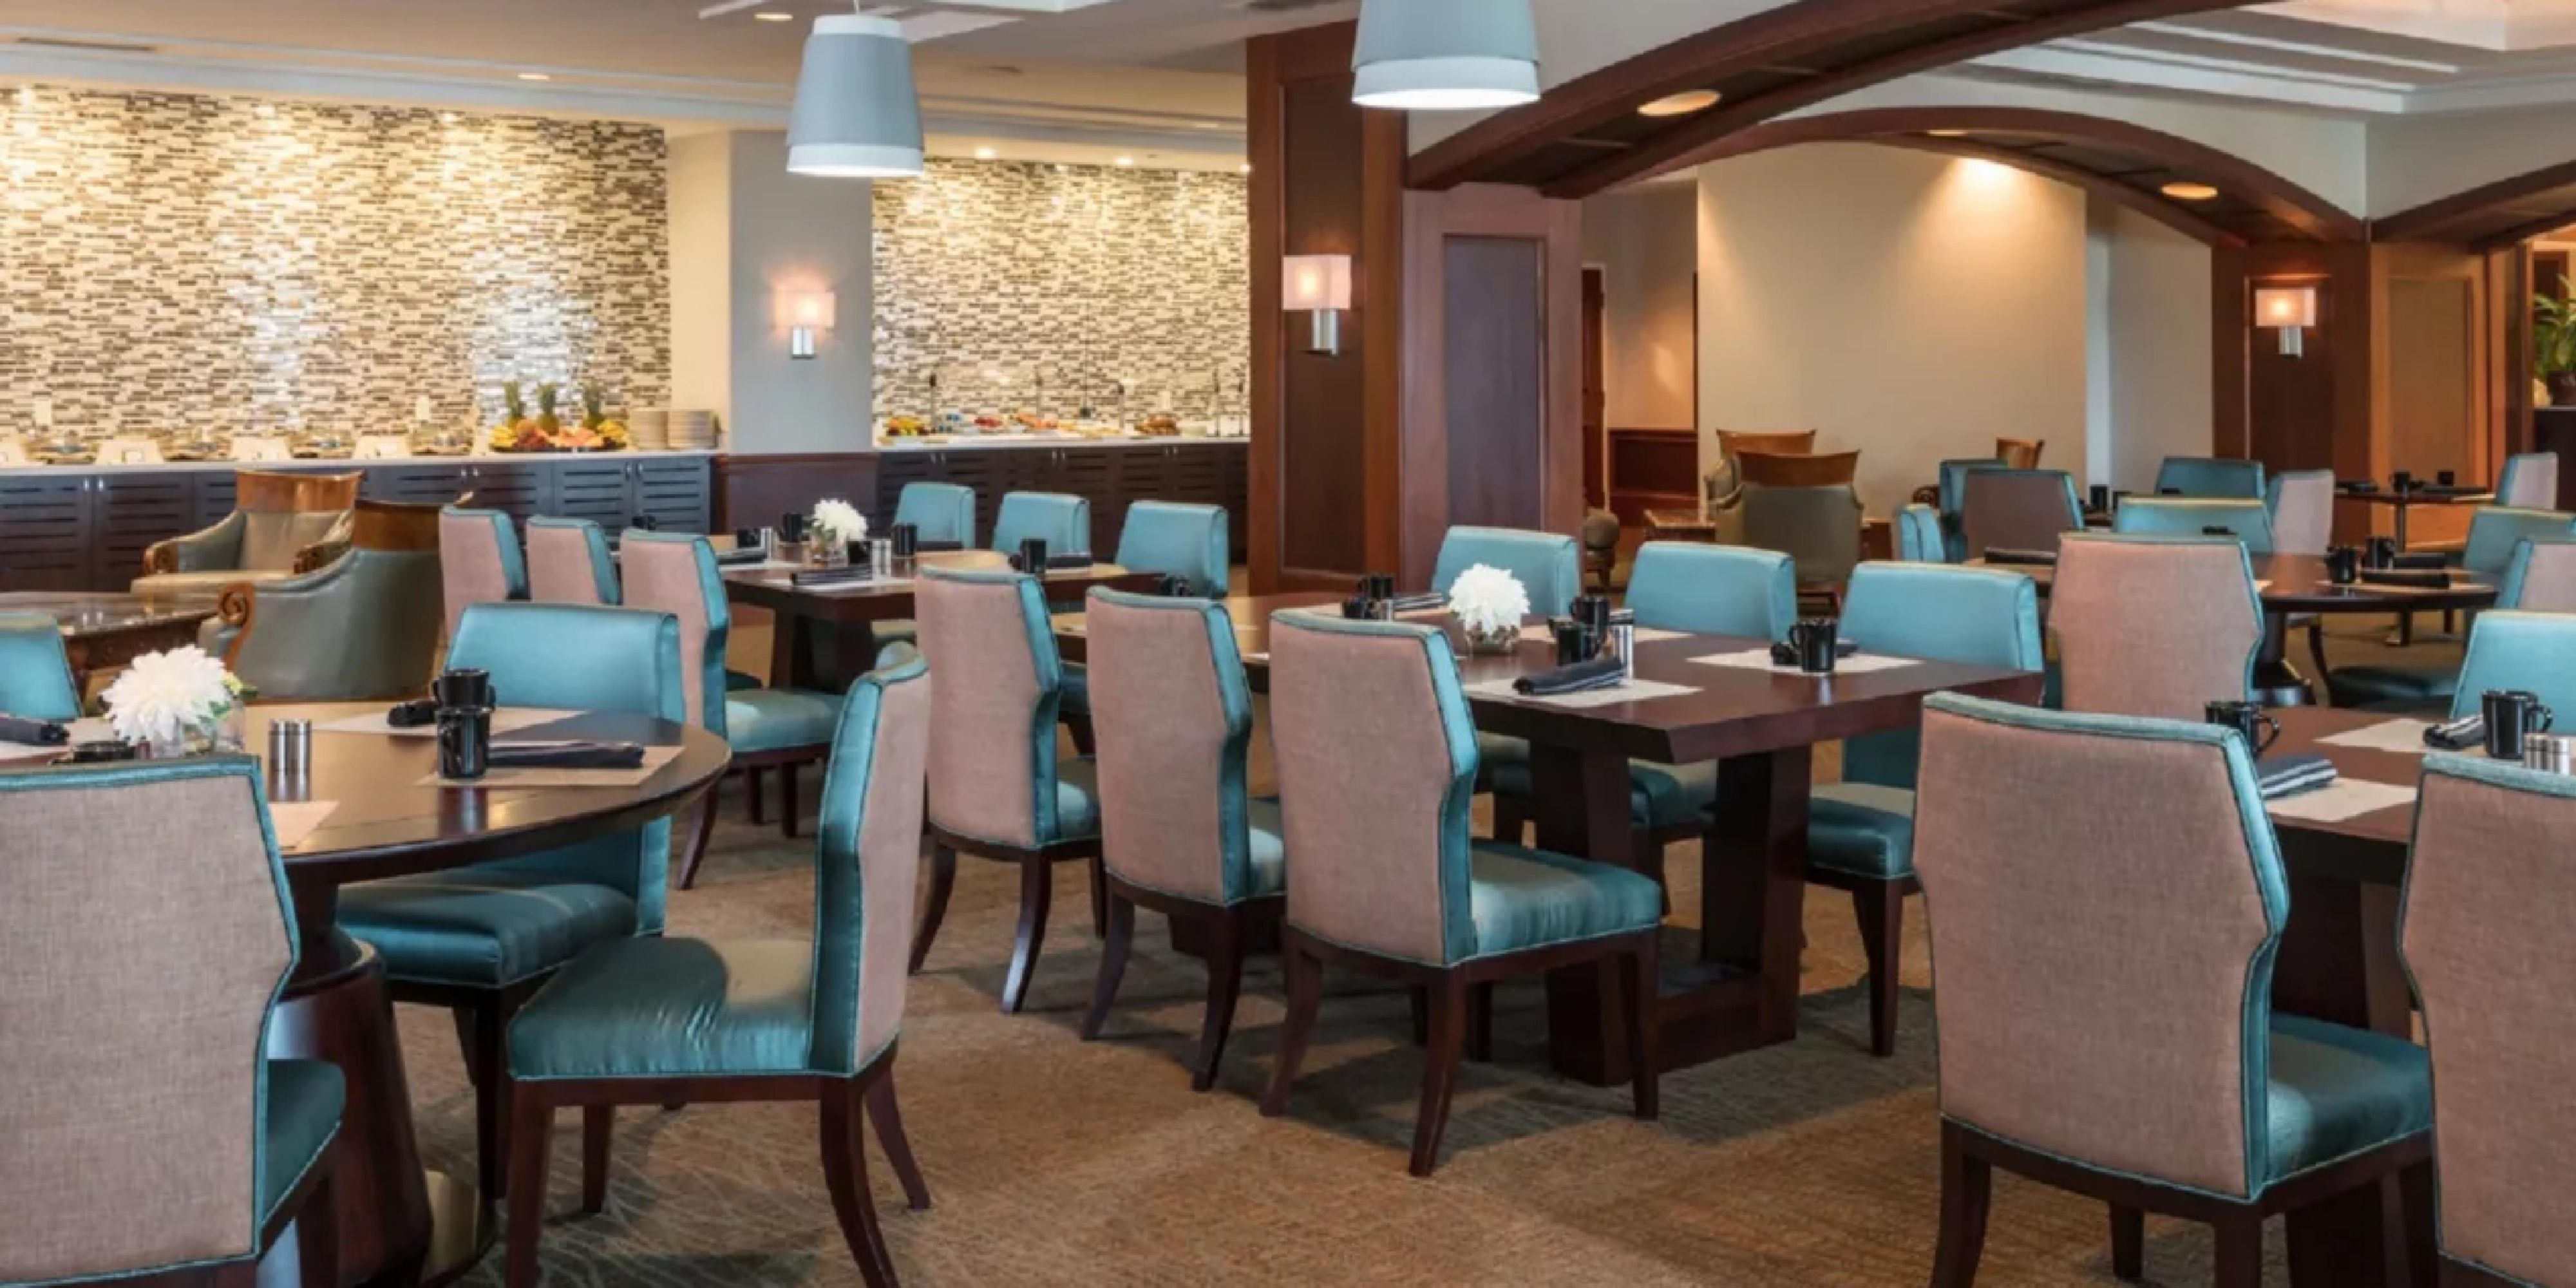 Looking for a quick bite, Starbucks coffee, Lunch, Dinner, or a relaxing beverage, you can find them all just steps away at our sister property the Crowne Plaza.